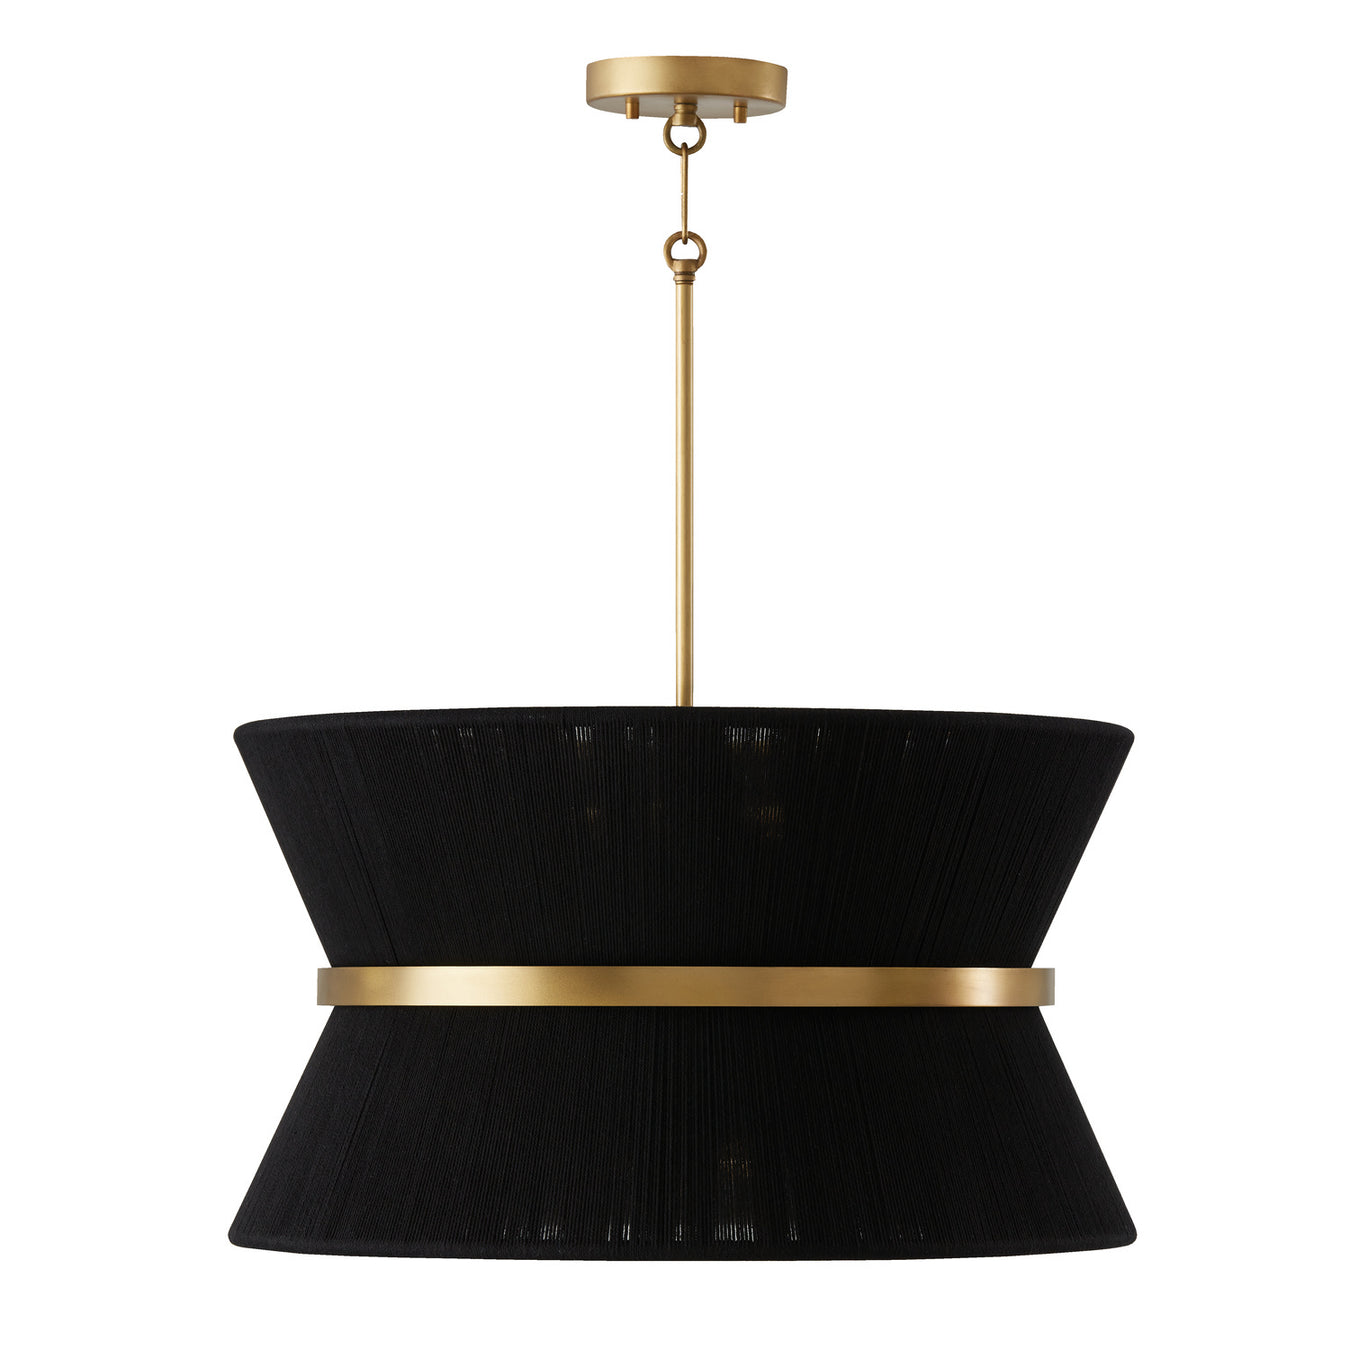 Cecilia Eight Light Pendant in Black Rope and Patinaed Brass